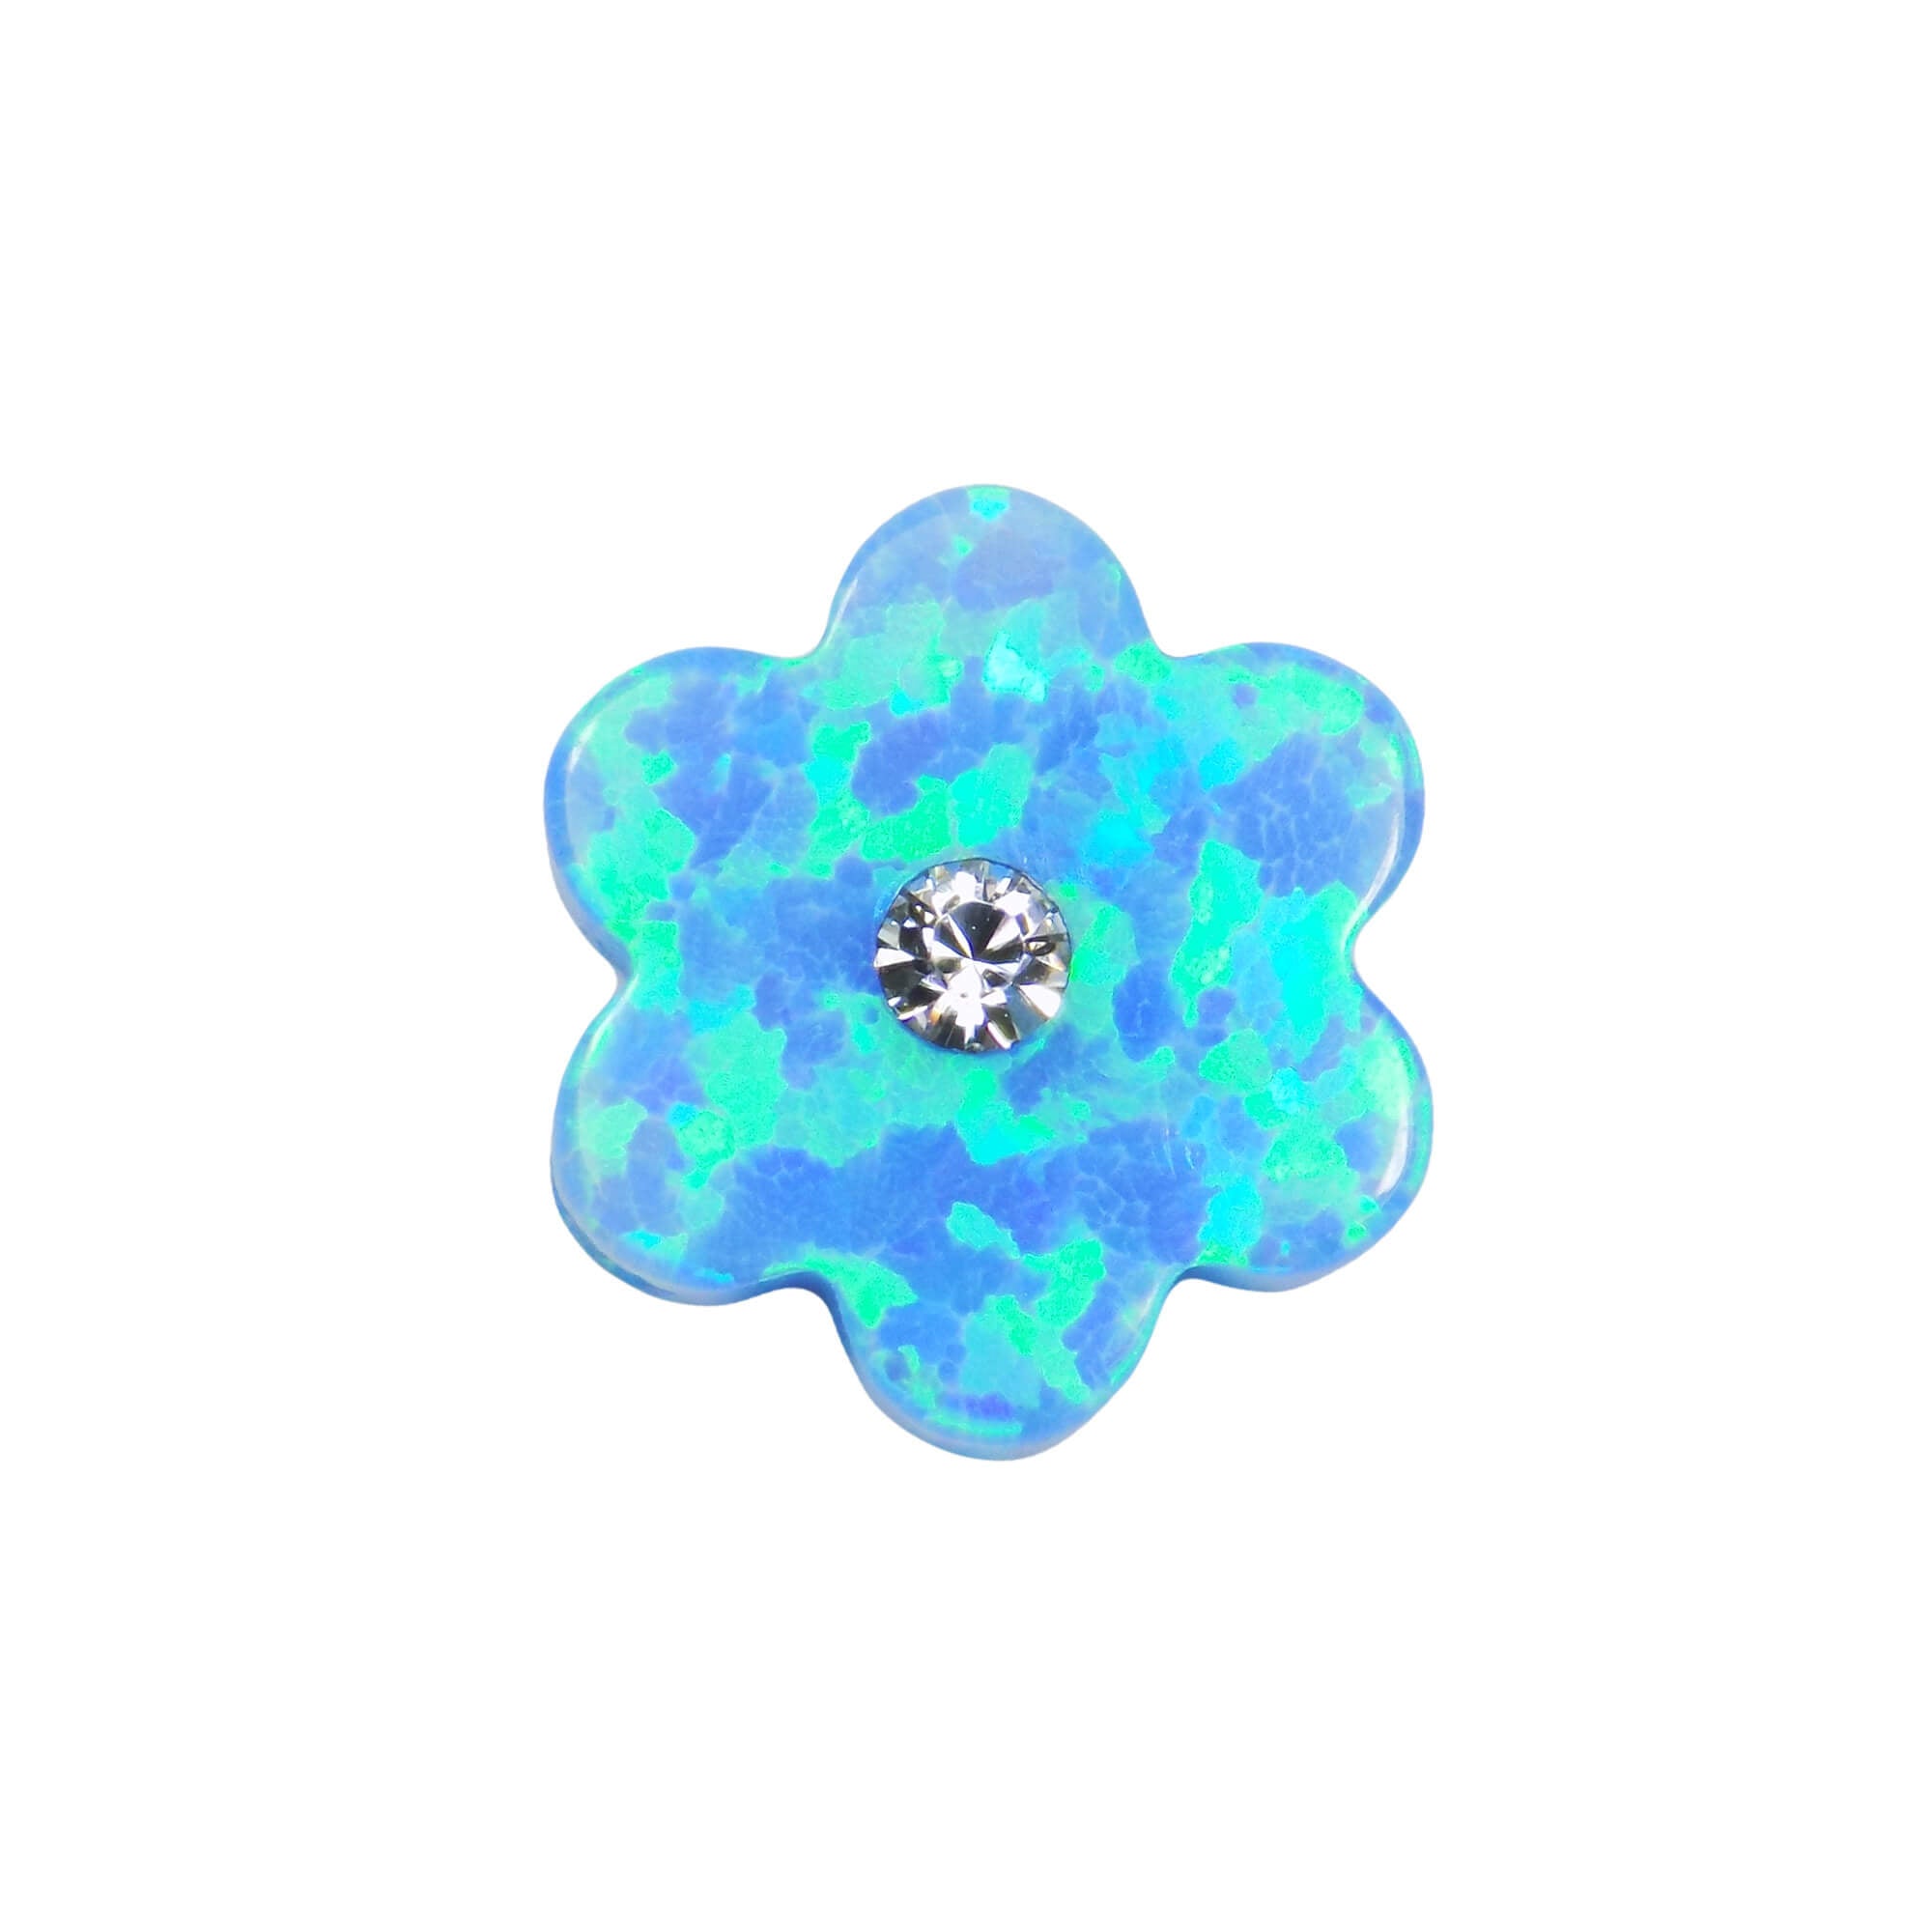 Synthetic Opal Blue Flower Bead Charm 10mm with cubic Zircon